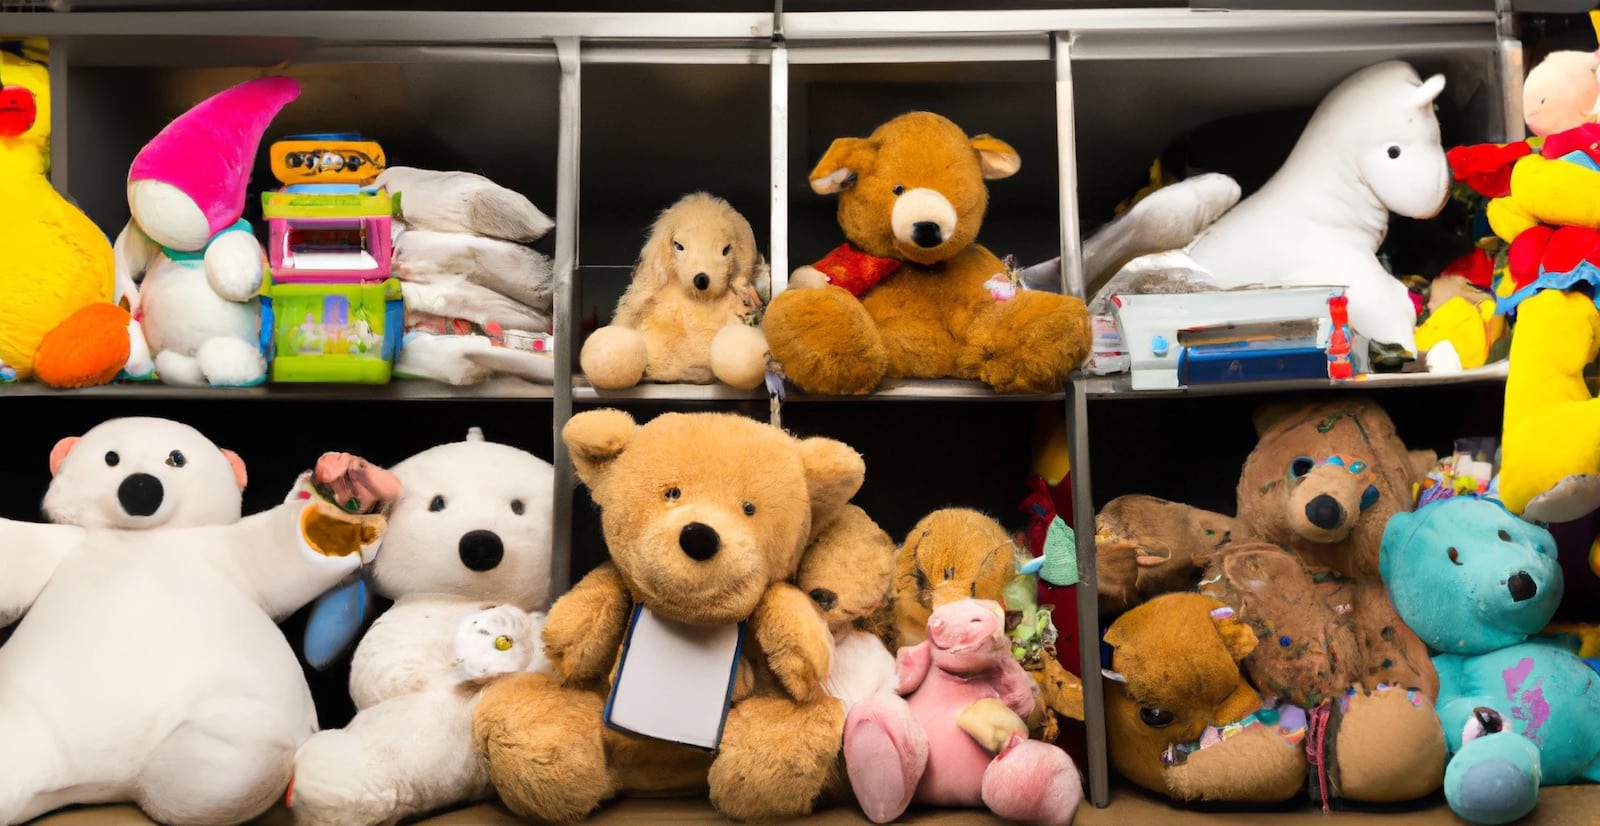 AI generated image of stuffed animals in a self storage facility.